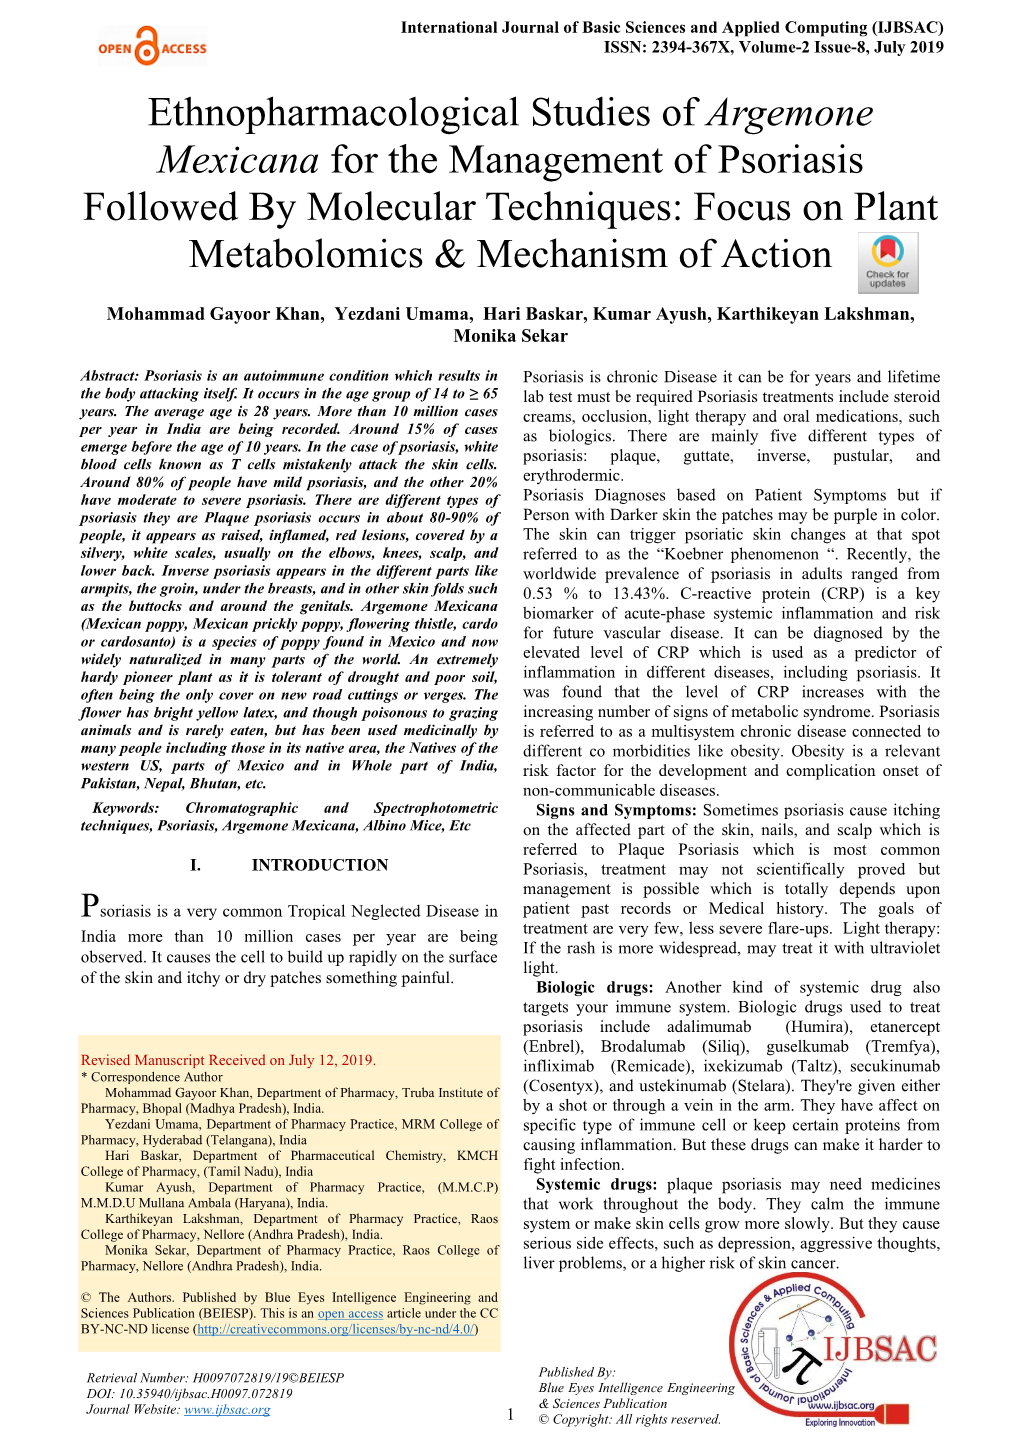 Argemone Mexicana for the Management of Psoriasis Followed by Molecular Techniques: Focus on Plant Metabolomics & Mechanism of Action